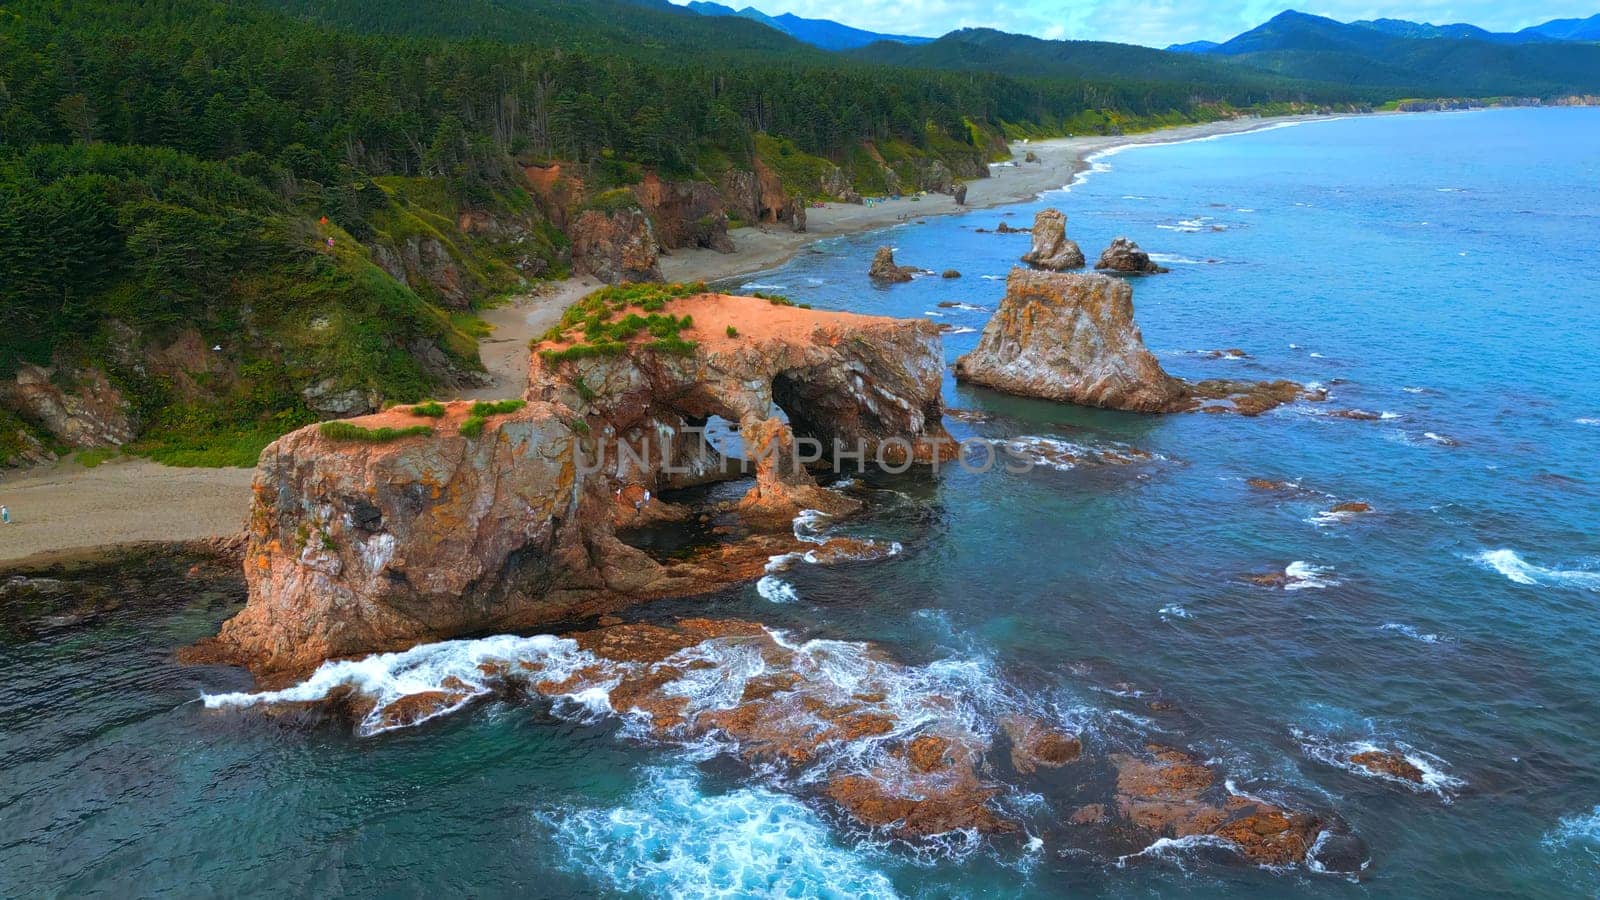 Top view of amazing cliffs of sea coast. Clip. Rocks with erosion of sea waves create amazing stone arches. Beautiful rocky arches on seashore.